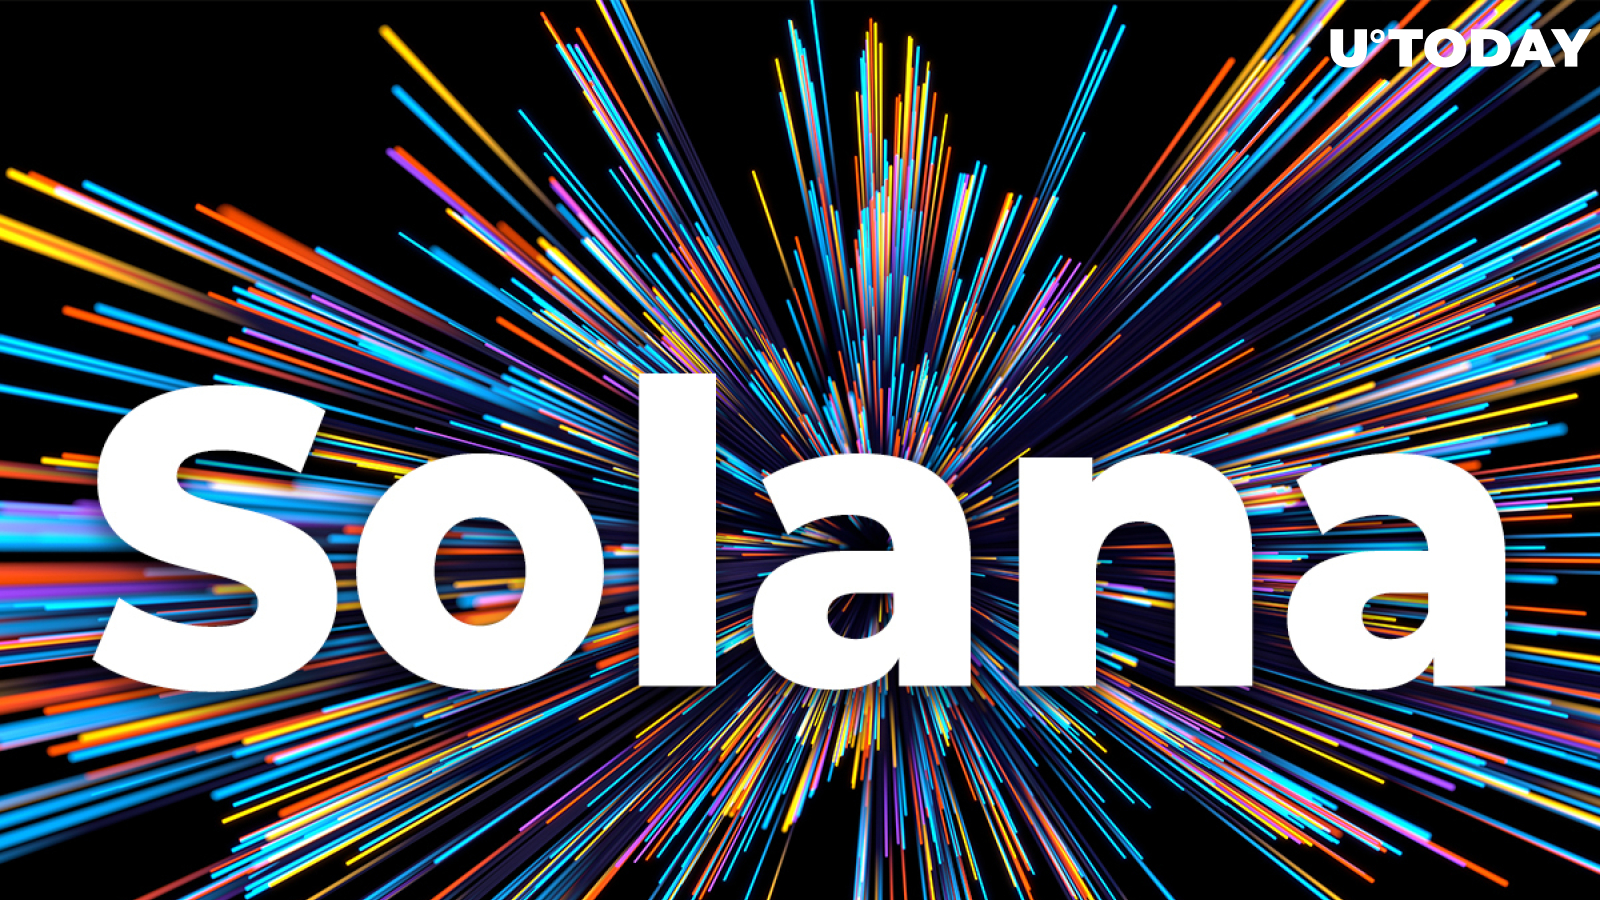 Solana (SOL) Exploding, What is Behind Hype? Crypto Influencer Answers